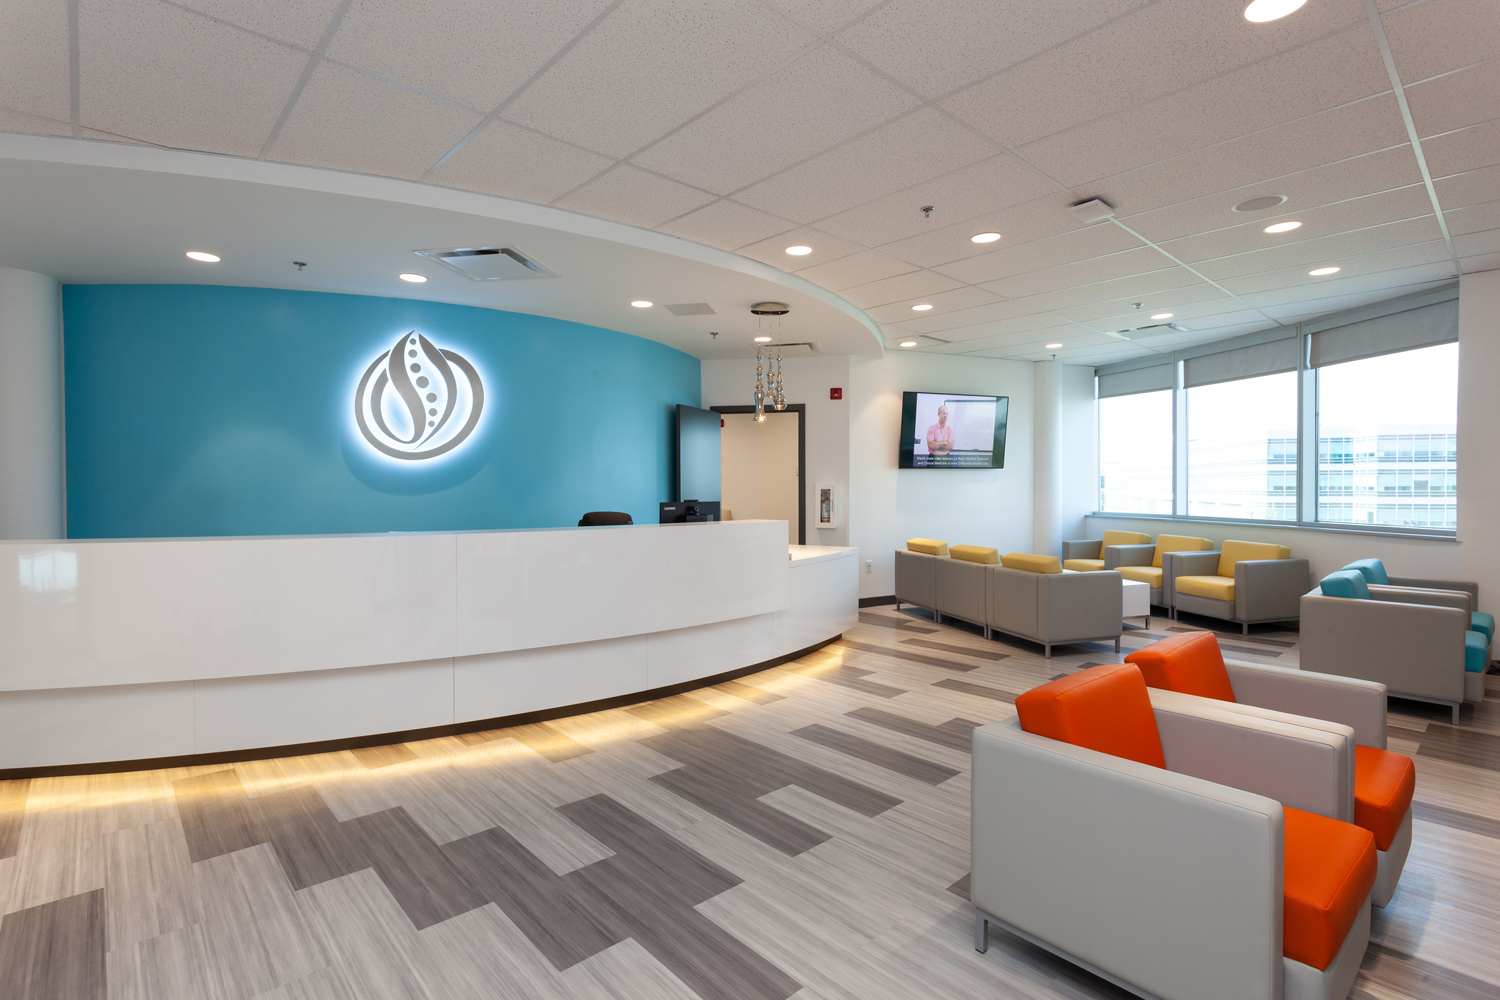 The lobby of the Oasis Fertility Clinic in Calgary, Alberta.